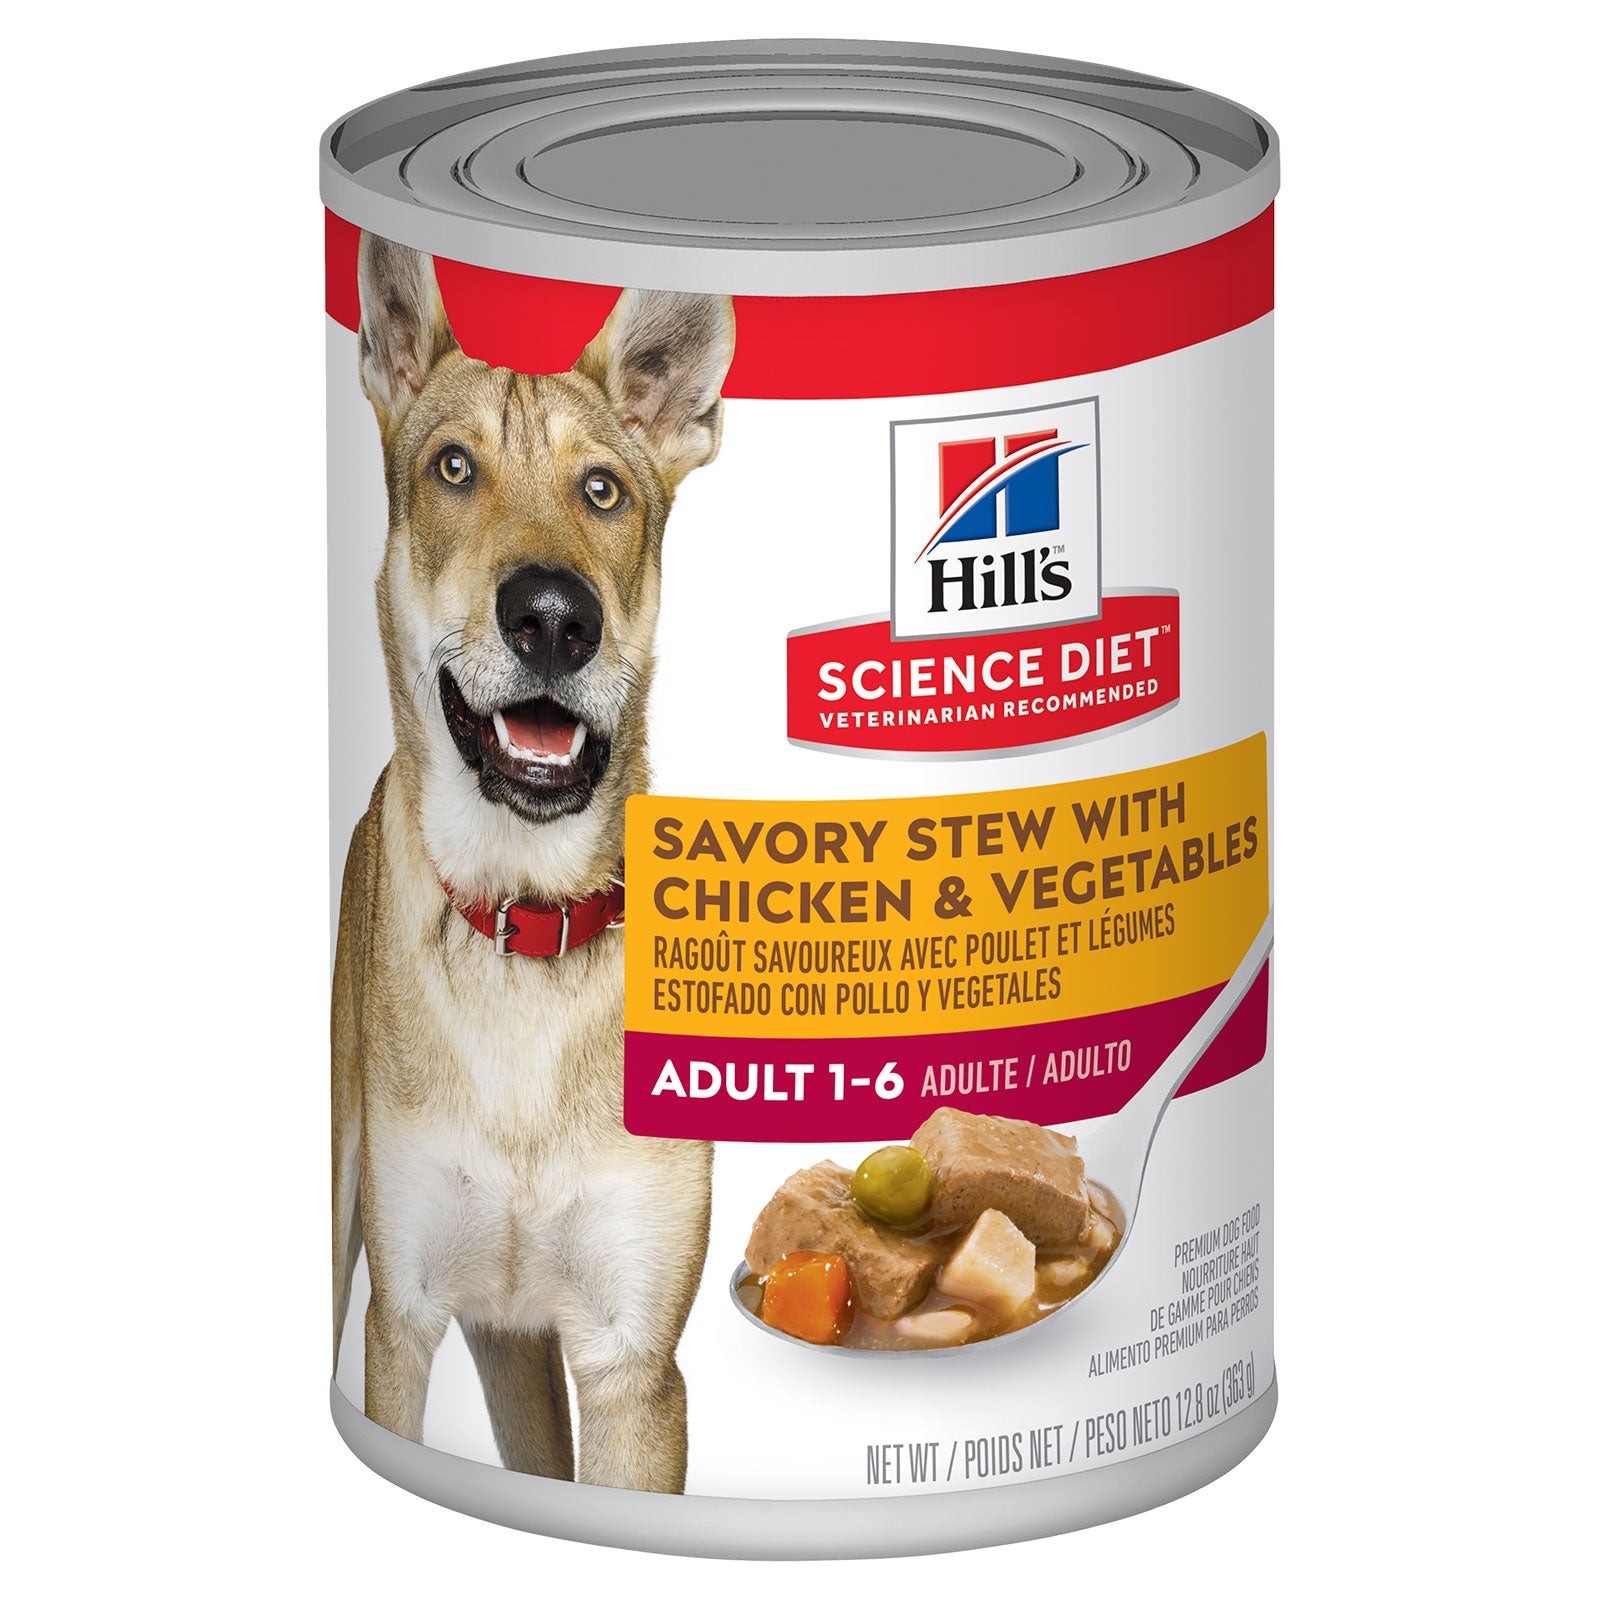 Hill's Science Diet Dog Food Can Adult Savoury Stew with Chicken & Vegetables